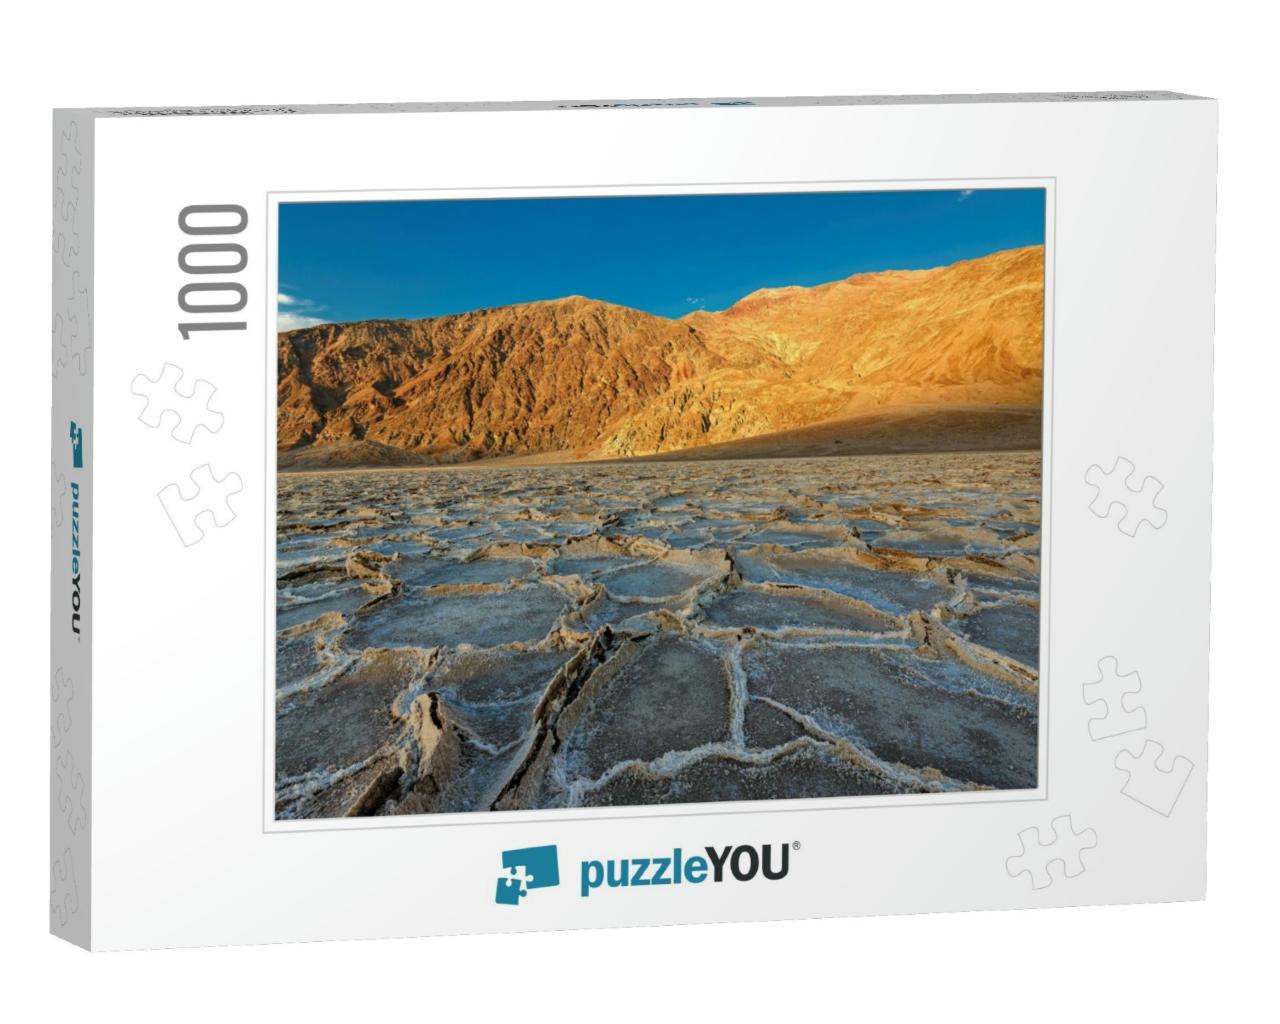 Desert, Dry Lake in Death Valley, Dry Lake Badwater, Cali... Jigsaw Puzzle with 1000 pieces